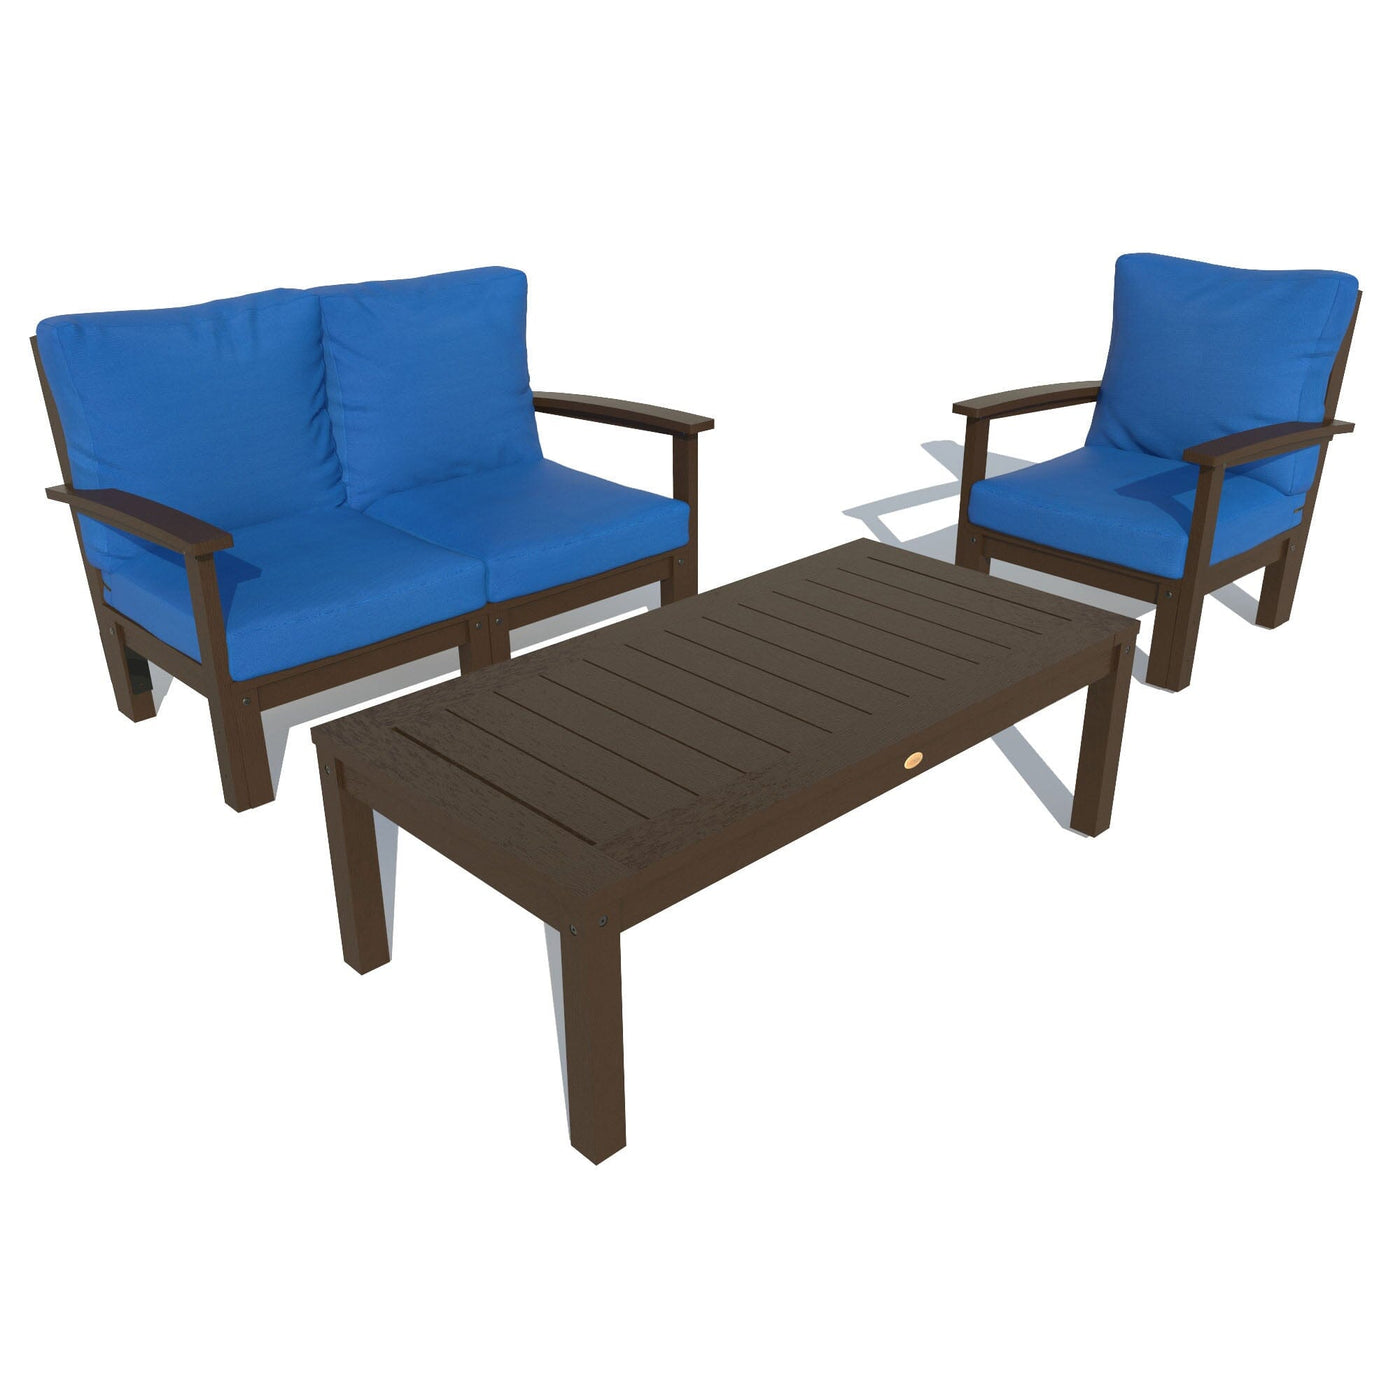 Bespoke Deep Seating: Loveseat, Chair and Conversation Table Deep Seating Highwood USA Cobalt Blue Weathered Acorn 